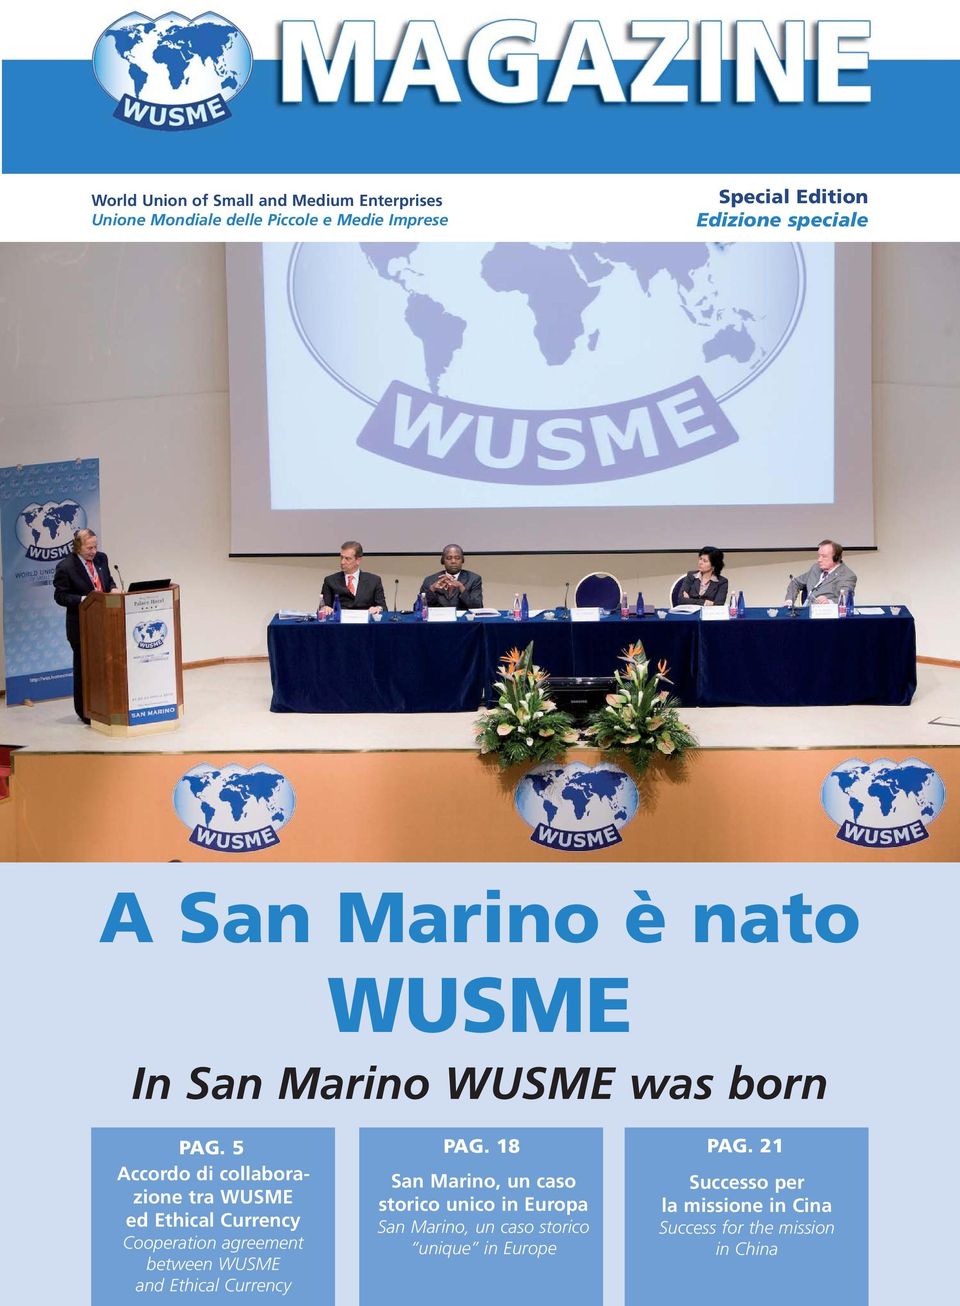 21 Accordo di collaborazione tra WUSME ed Ethical Currency Cooperation agreement between WUSME and Ethical Currency